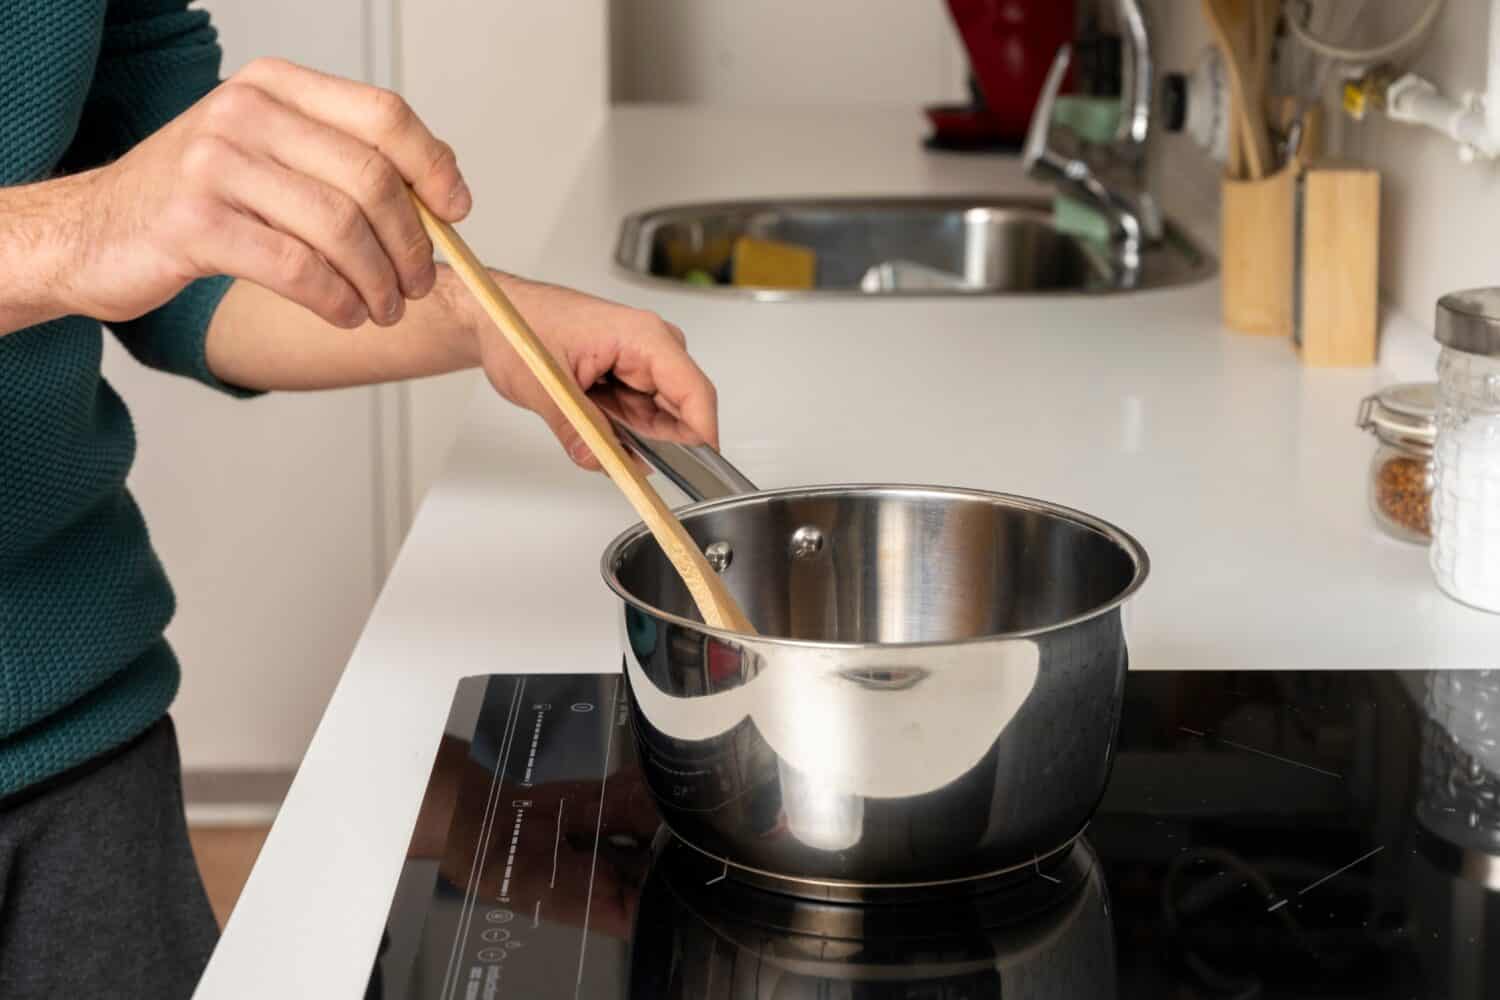 Young man's hands stirring sauce for spaghetti on ceramic hob